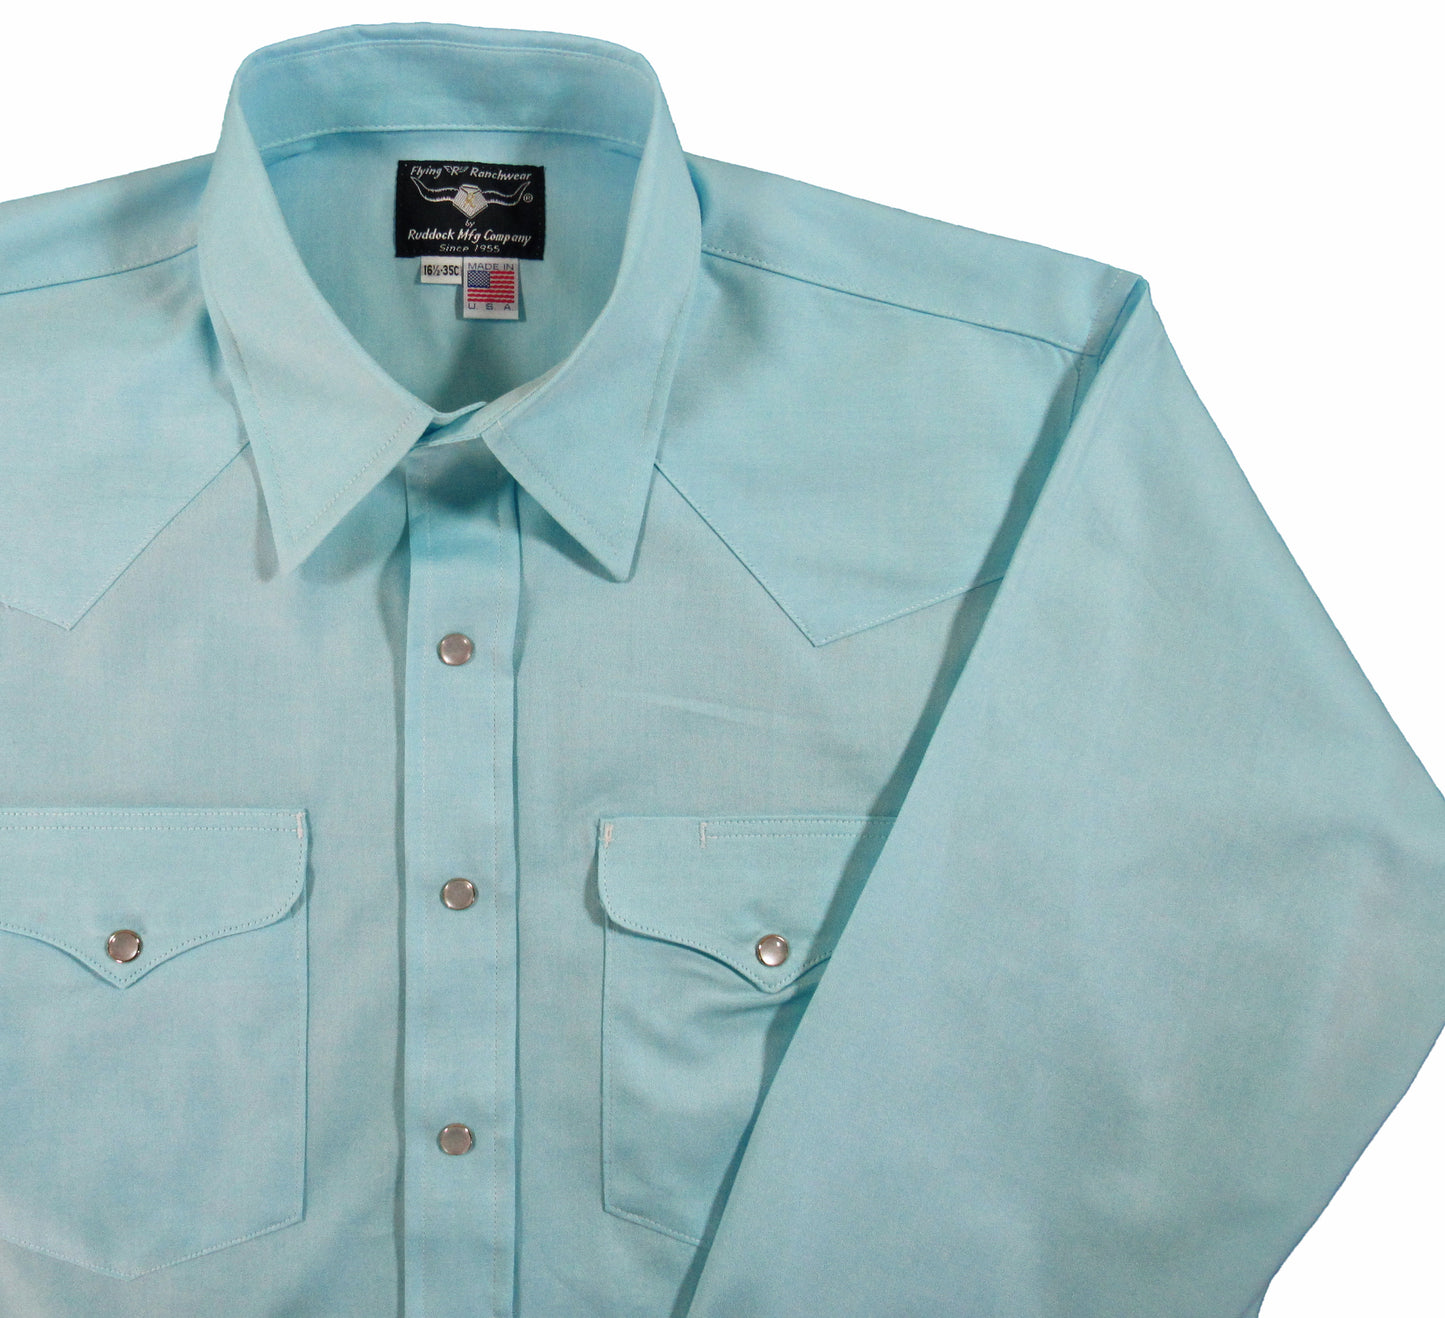 Flying R Ranchwear - Primo Pinpoint Oxford - Mint Green - Long Sleeve